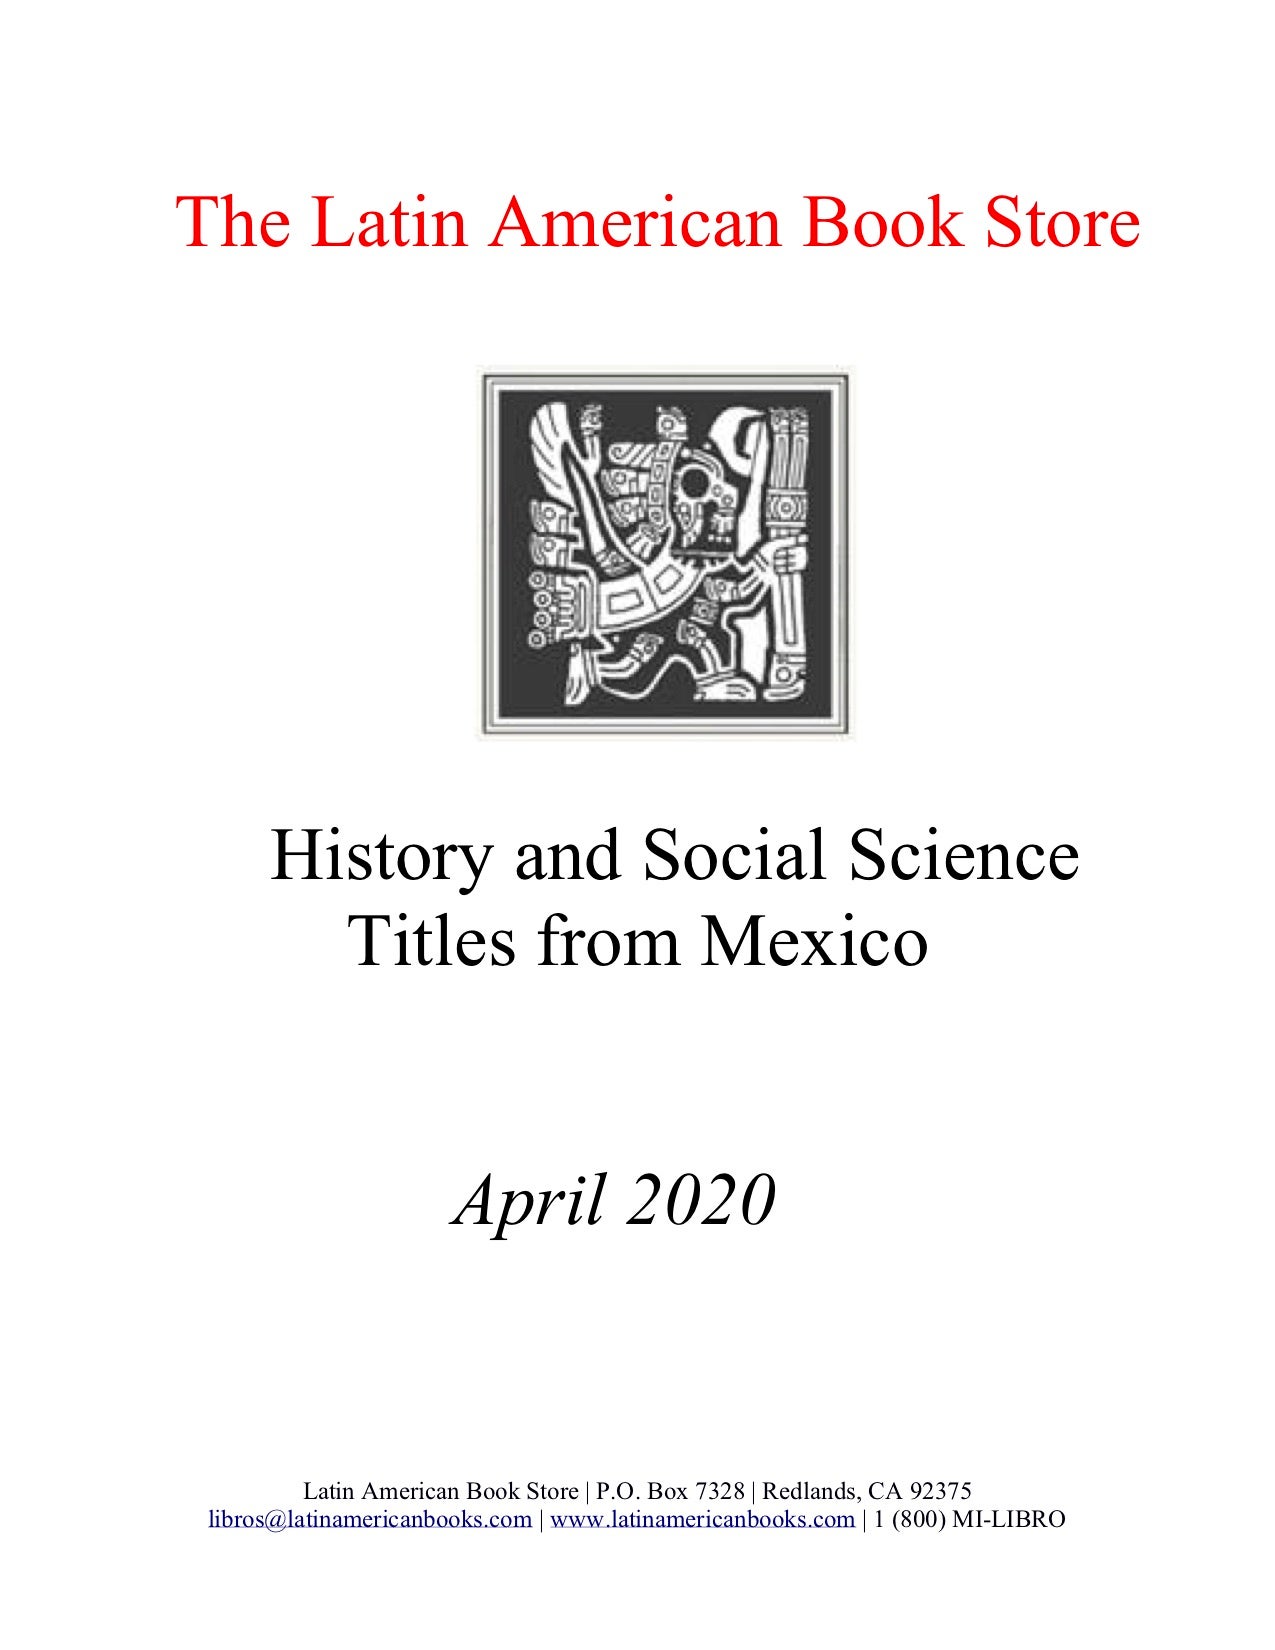 Mexican History and Social Sciences Titles -- April 2020